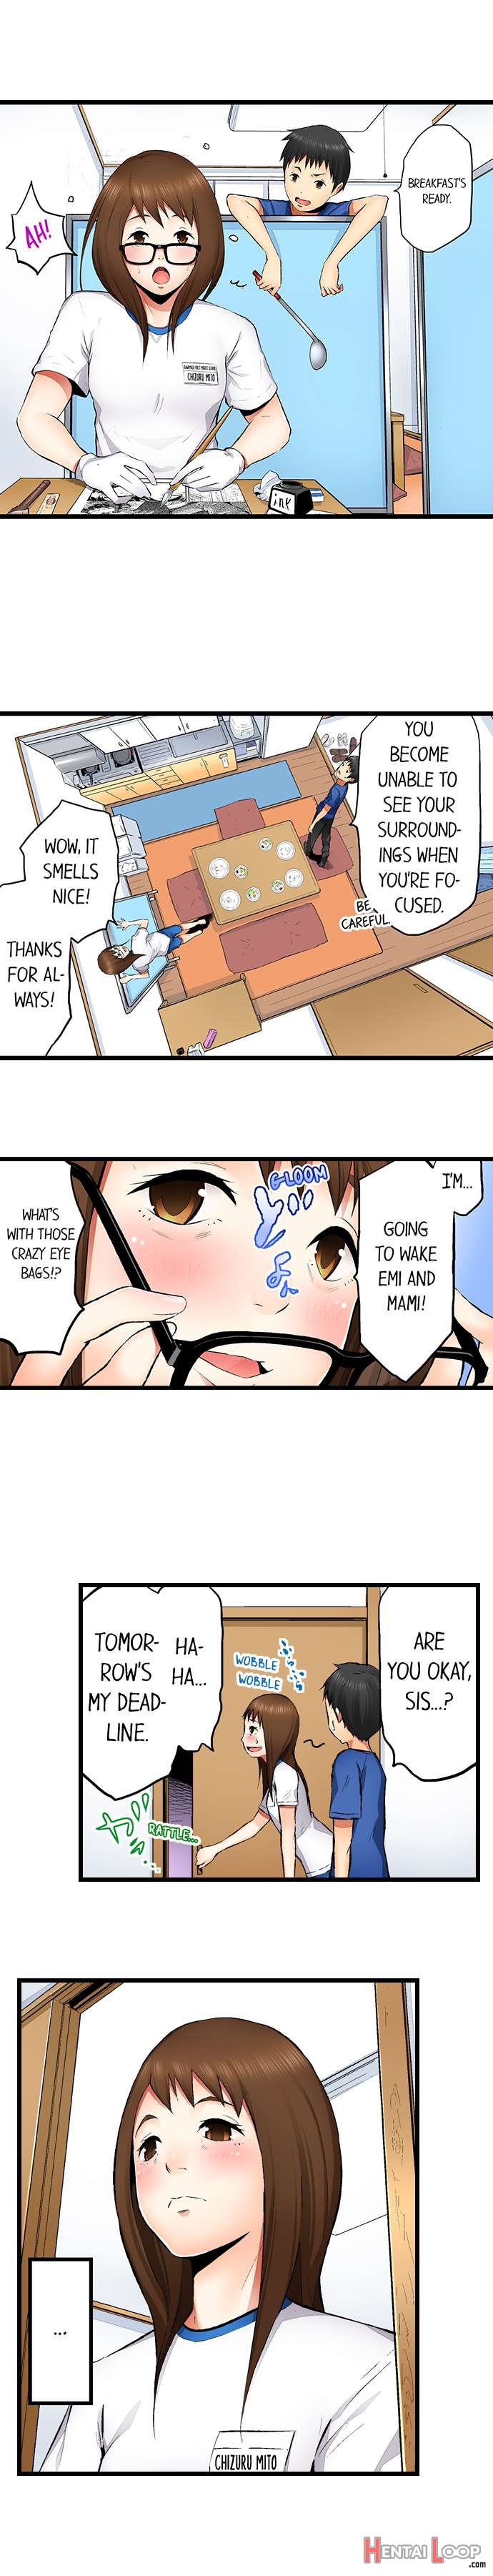 She’s A Hentai Artist page 4